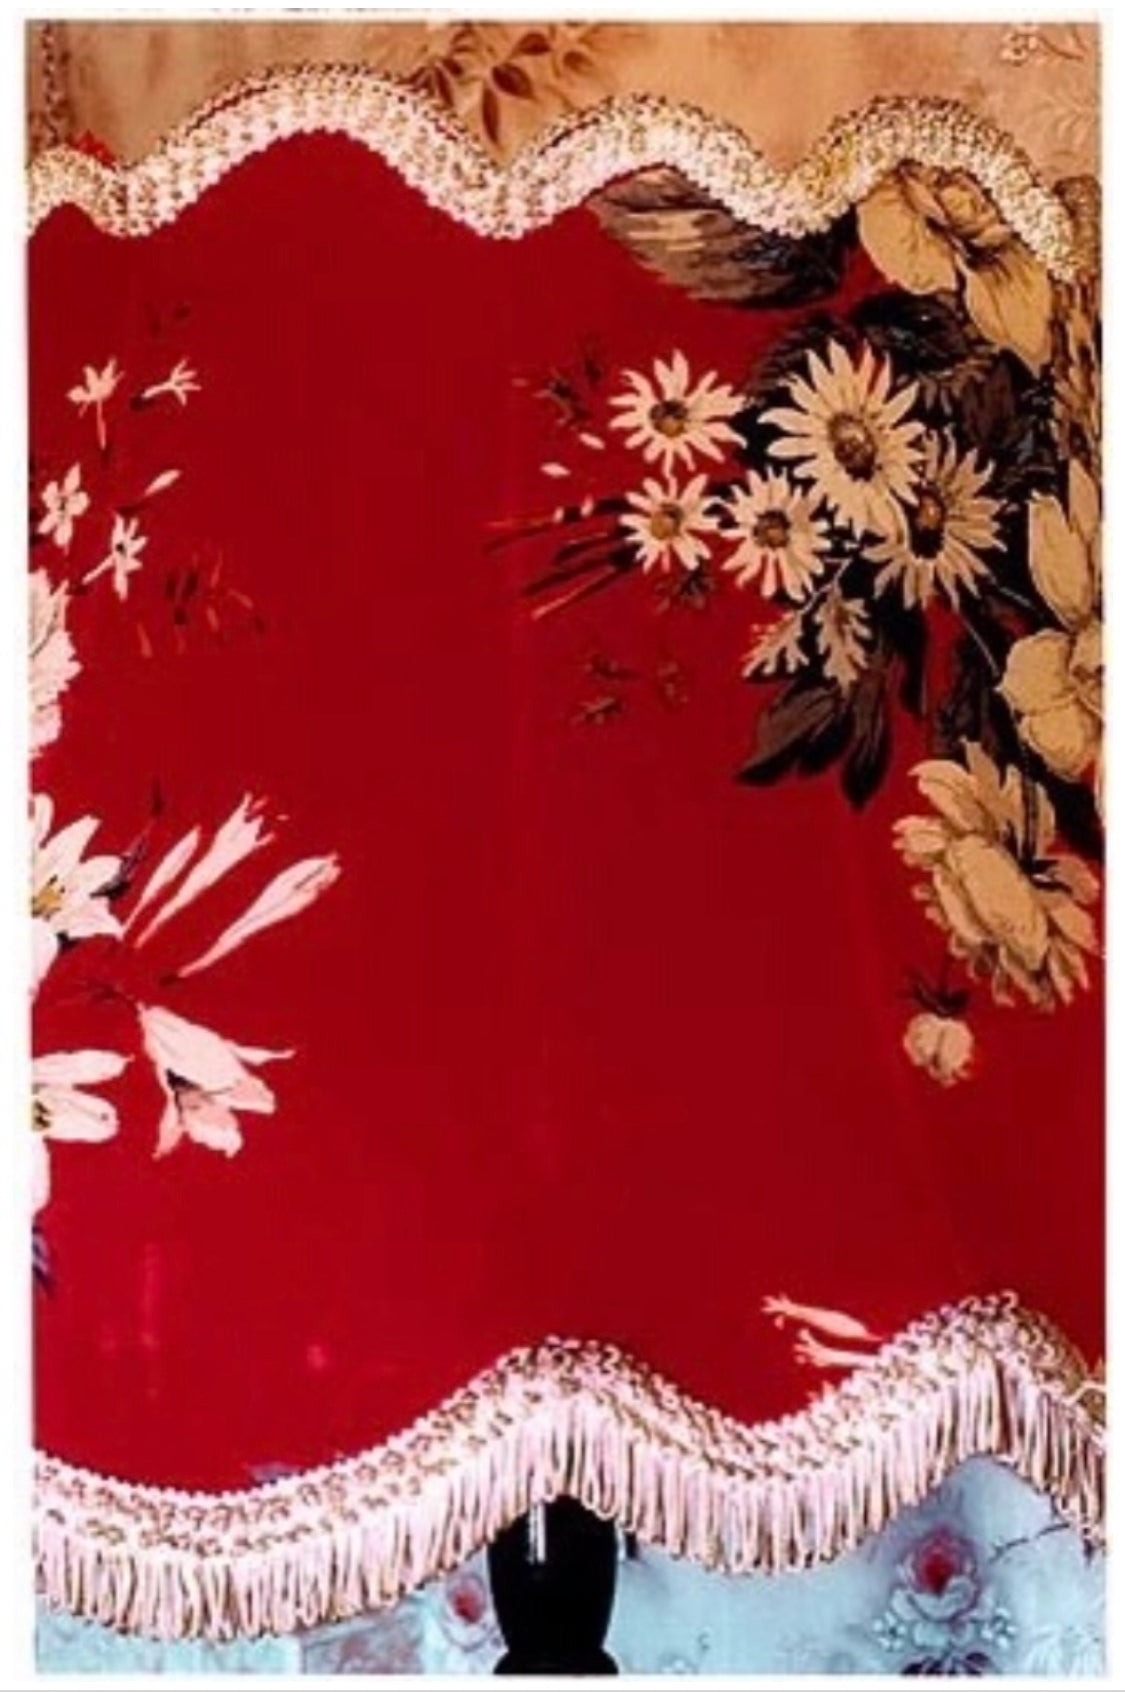 Floral detail on a red lampshade in a rural home.